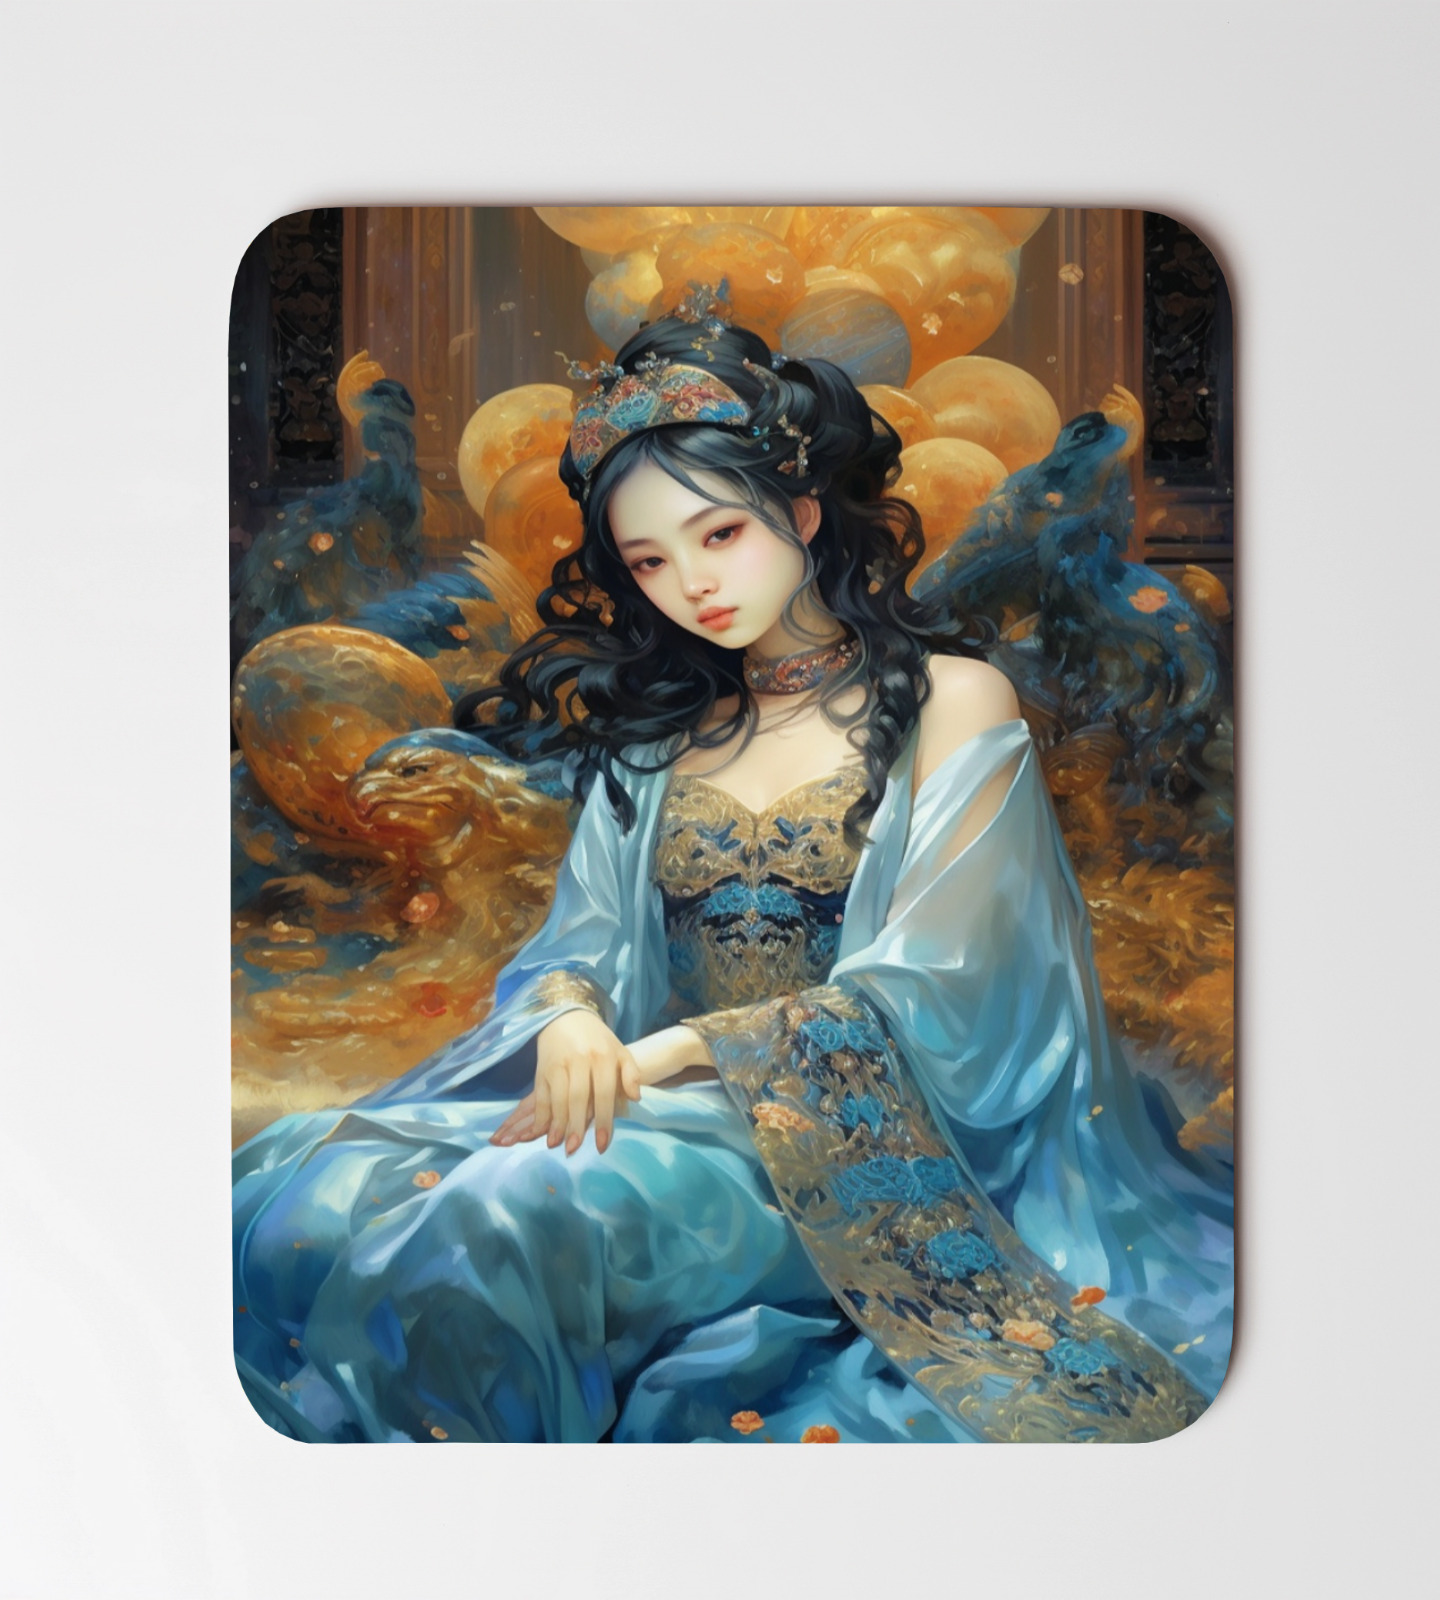 Chinese Princess Abstract Art Desk Mouse Pad 8\